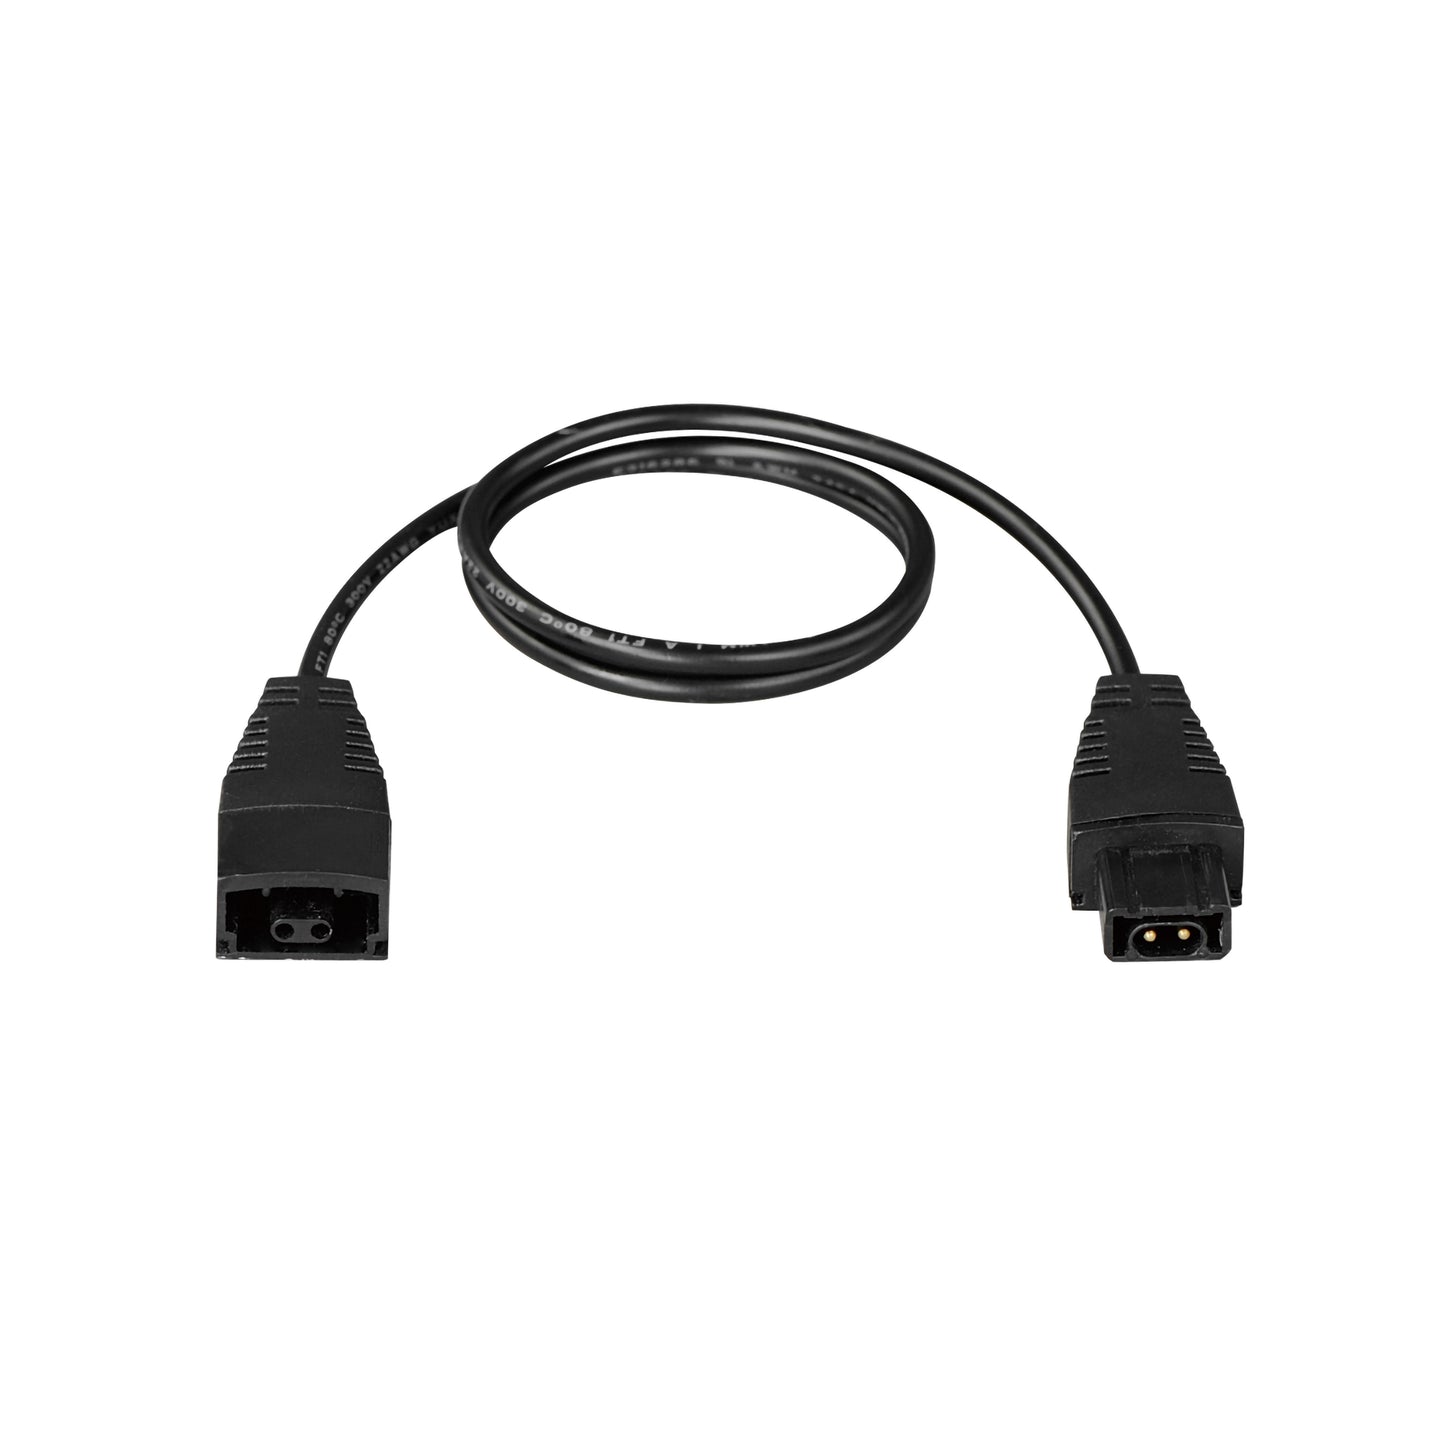 CRD898-18BK - CounterMax SS 18" Connecting Cord - Black